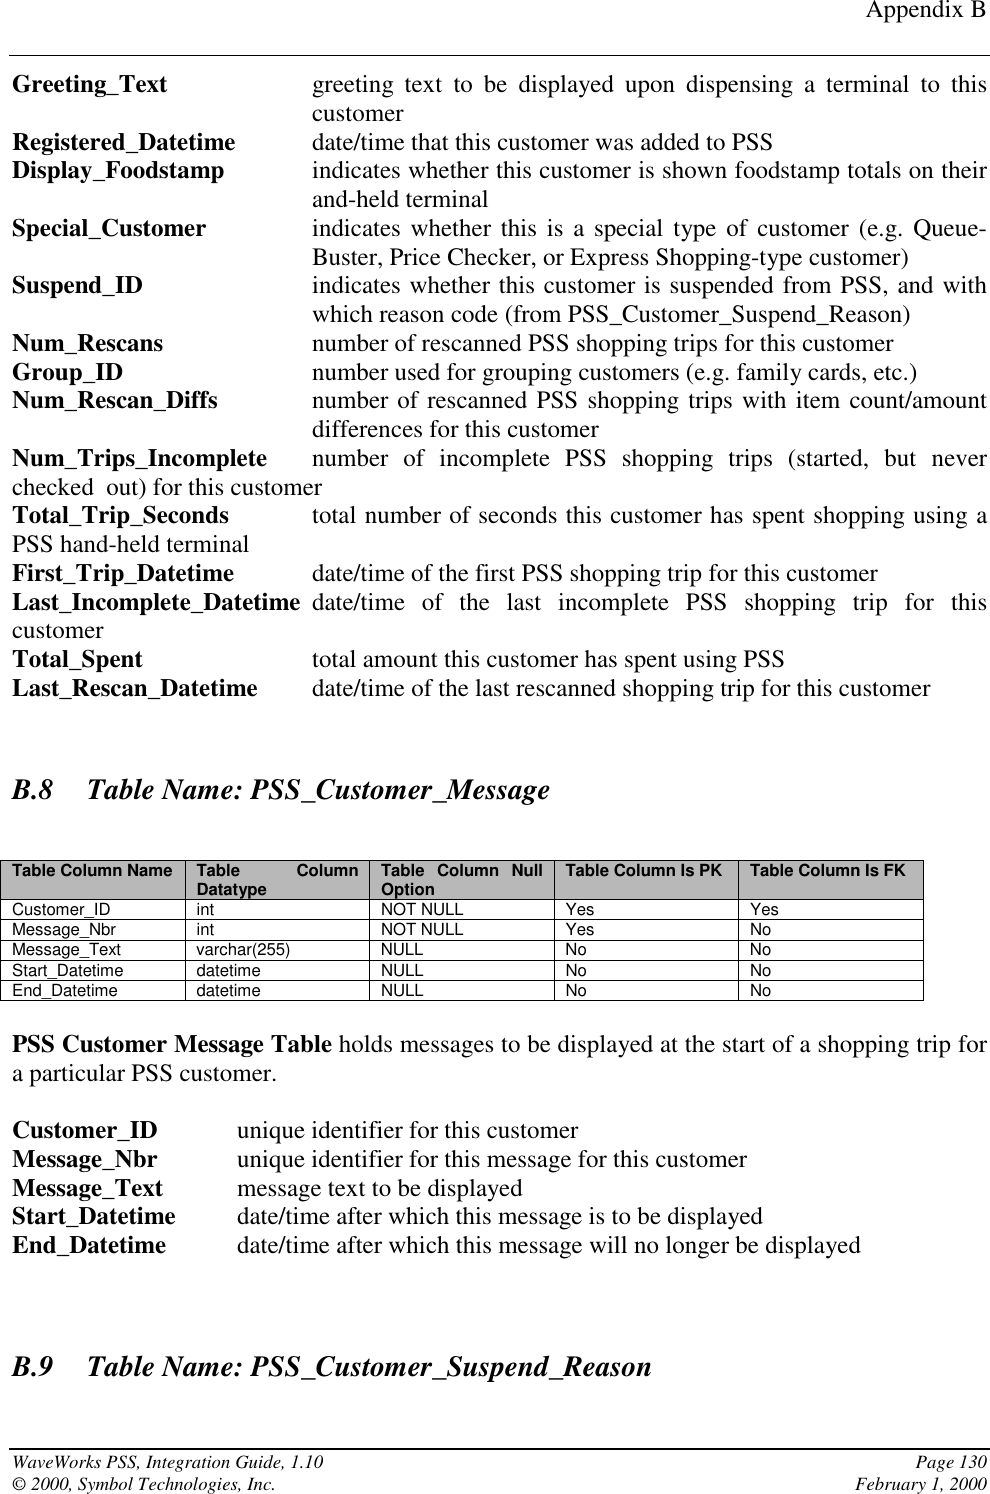 Appendix BWaveWorks PSS, Integration Guide, 1.10 Page 130© 2000, Symbol Technologies, Inc. February 1, 2000Greeting_Text greeting text to be displayed upon dispensing a terminal to thiscustomerRegistered_Datetime date/time that this customer was added to PSSDisplay_Foodstamp indicates whether this customer is shown foodstamp totals on theirand-held terminalSpecial_Customer indicates whether this is a special type of customer (e.g. Queue-Buster, Price Checker, or Express Shopping-type customer)Suspend_ID indicates whether this customer is suspended from PSS, and withwhich reason code (from PSS_Customer_Suspend_Reason)Num_Rescans number of rescanned PSS shopping trips for this customerGroup_ID number used for grouping customers (e.g. family cards, etc.)Num_Rescan_Diffs number of rescanned PSS shopping trips with item count/amountdifferences for this customerNum_Trips_Incomplete number of incomplete PSS shopping trips (started, but neverchecked  out) for this customerTotal_Trip_Seconds total number of seconds this customer has spent shopping using aPSS hand-held terminalFirst_Trip_Datetime date/time of the first PSS shopping trip for this customerLast_Incomplete_Datetime date/time of the last incomplete PSS shopping trip for thiscustomerTotal_Spent total amount this customer has spent using PSSLast_Rescan_Datetime date/time of the last rescanned shopping trip for this customerB.8 Table Name: PSS_Customer_MessageTable Column Name Table ColumnDatatype Table Column NullOption Table Column Is PK Table Column Is FKCustomer_ID int NOT NULL Yes YesMessage_Nbr int NOT NULL Yes NoMessage_Text varchar(255) NULL No NoStart_Datetime datetime NULL No NoEnd_Datetime datetime NULL No NoPSS Customer Message Table holds messages to be displayed at the start of a shopping trip fora particular PSS customer.Customer_ID  unique identifier for this customerMessage_Nbr unique identifier for this message for this customerMessage_Text message text to be displayedStart_Datetime date/time after which this message is to be displayedEnd_Datetime date/time after which this message will no longer be displayedB.9 Table Name: PSS_Customer_Suspend_Reason